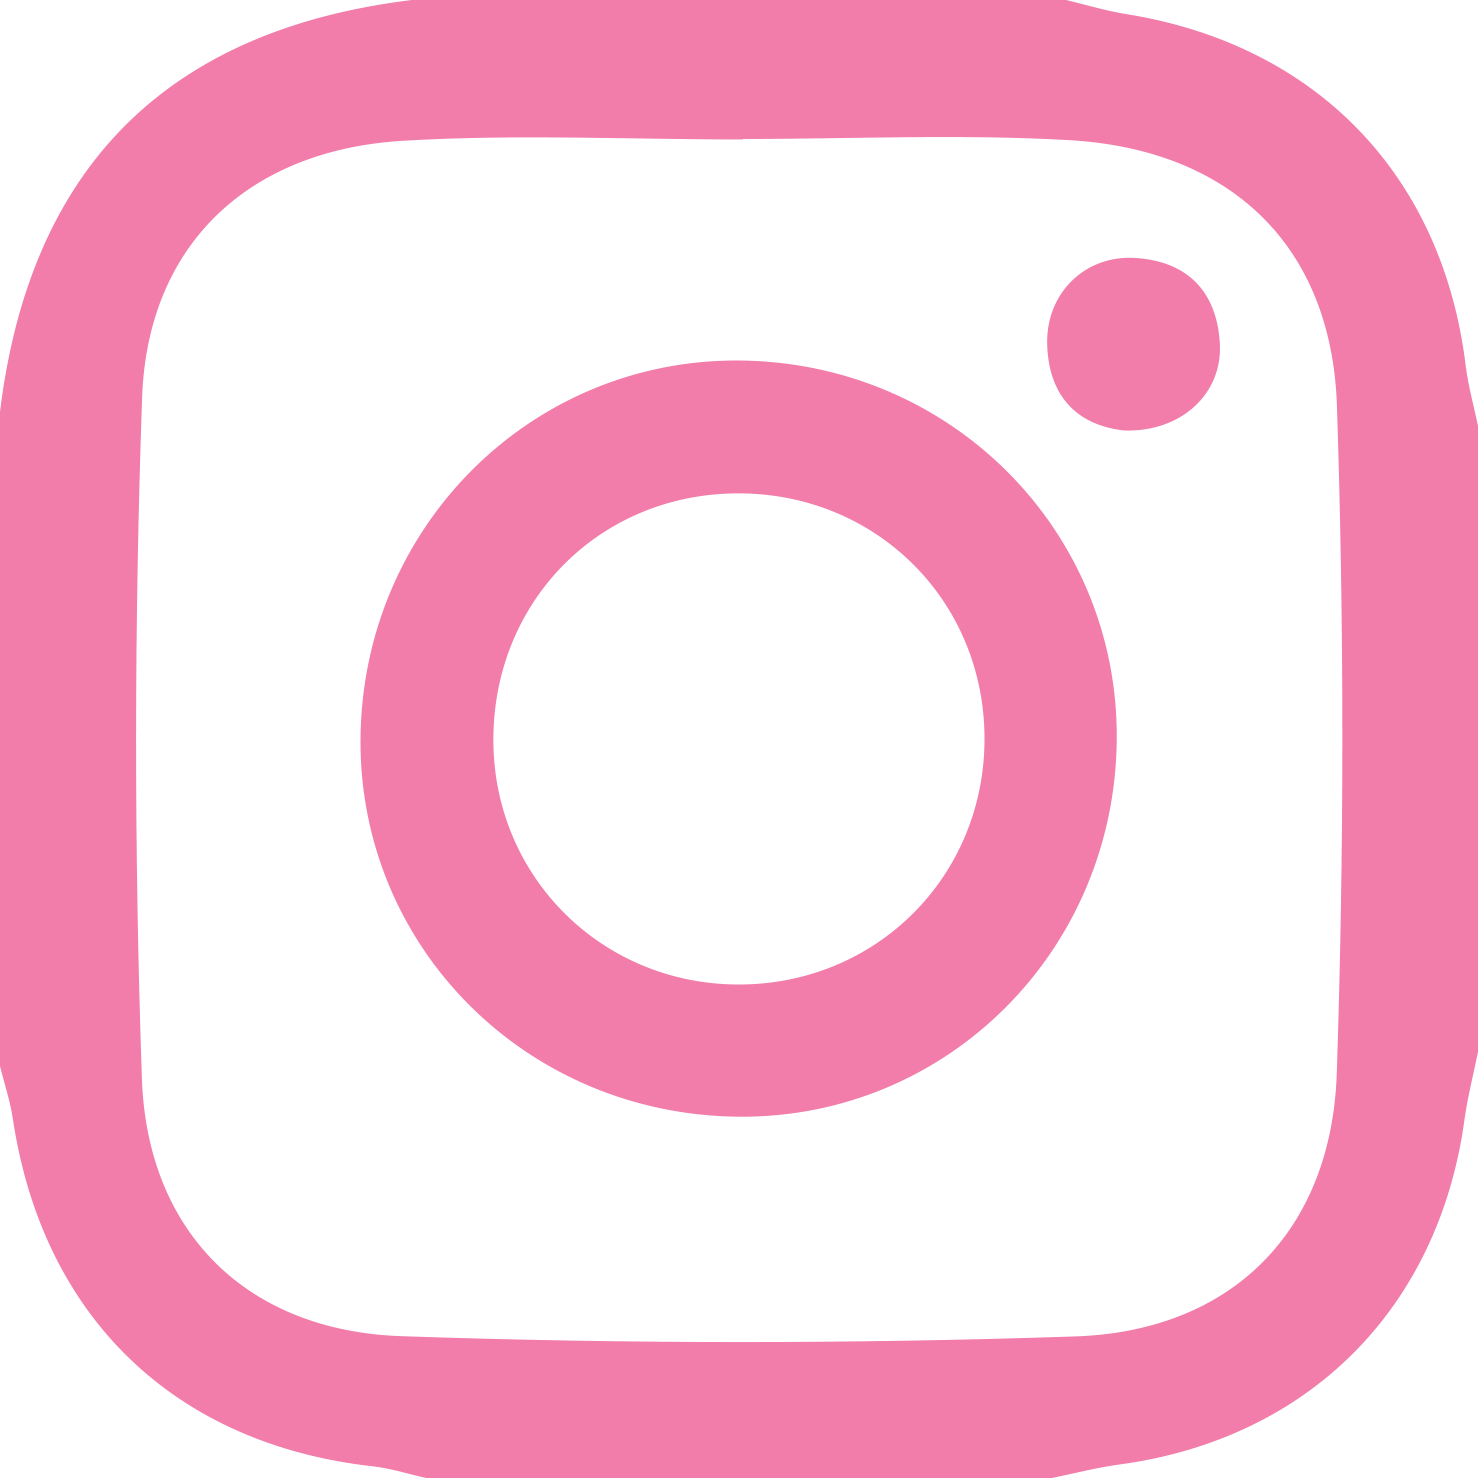 Instagram Logo Png No Background / free for commercial use high quality ...